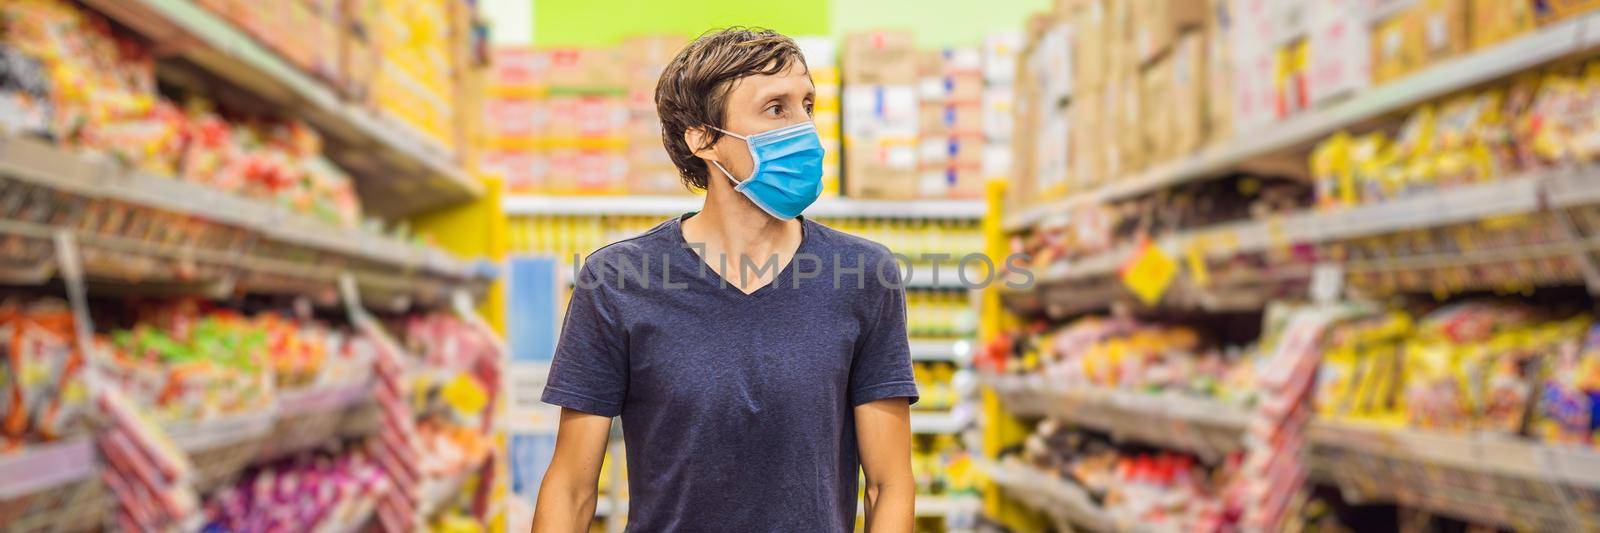 Alarmed man wears medical mask against coronavirus while grocery shopping in supermarket or store- health, safety and pandemic concept - young woman wearing protective mask and stockpiling food. BANNER, LONG FORMAT